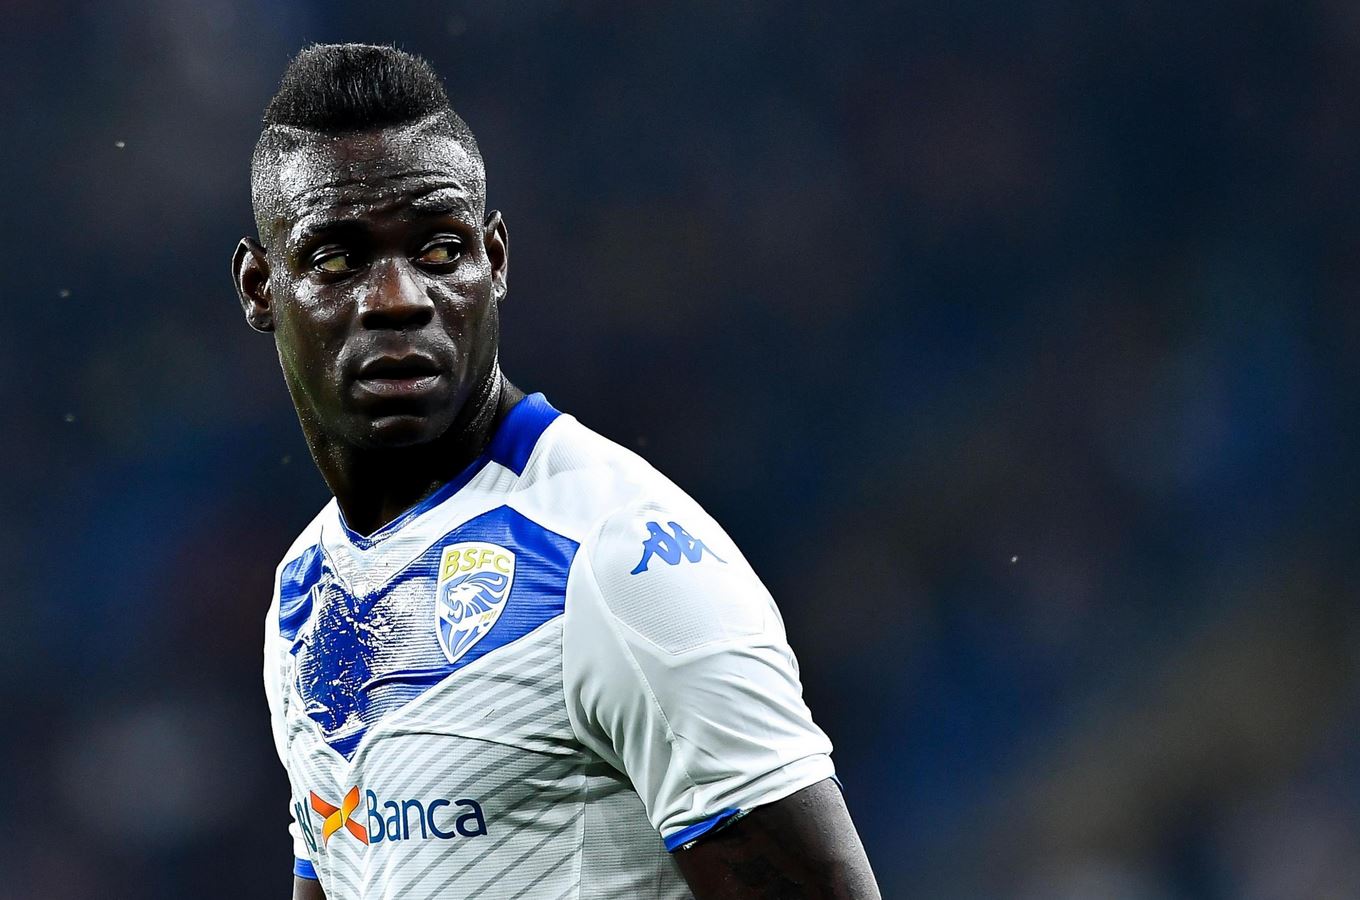 Mario Balotelli is about to sign a deal with Serie B club Monza. The 31-year-old striker is expected to undergo medical test with the club on Monday